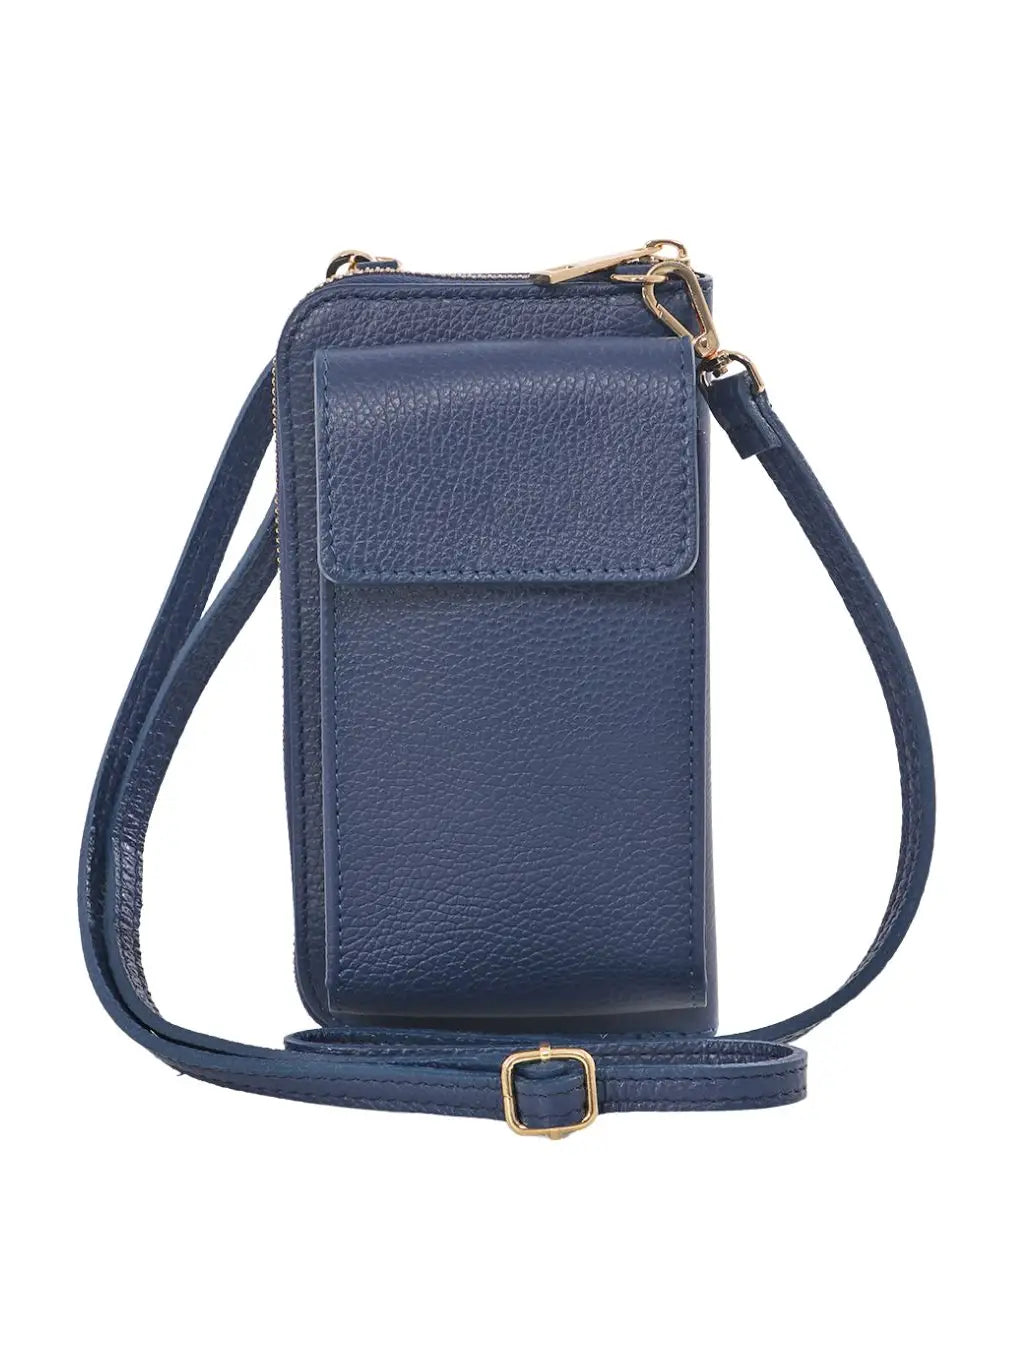 Navy Blue Italian Leather Mobile Phone Wallet Combo Bag